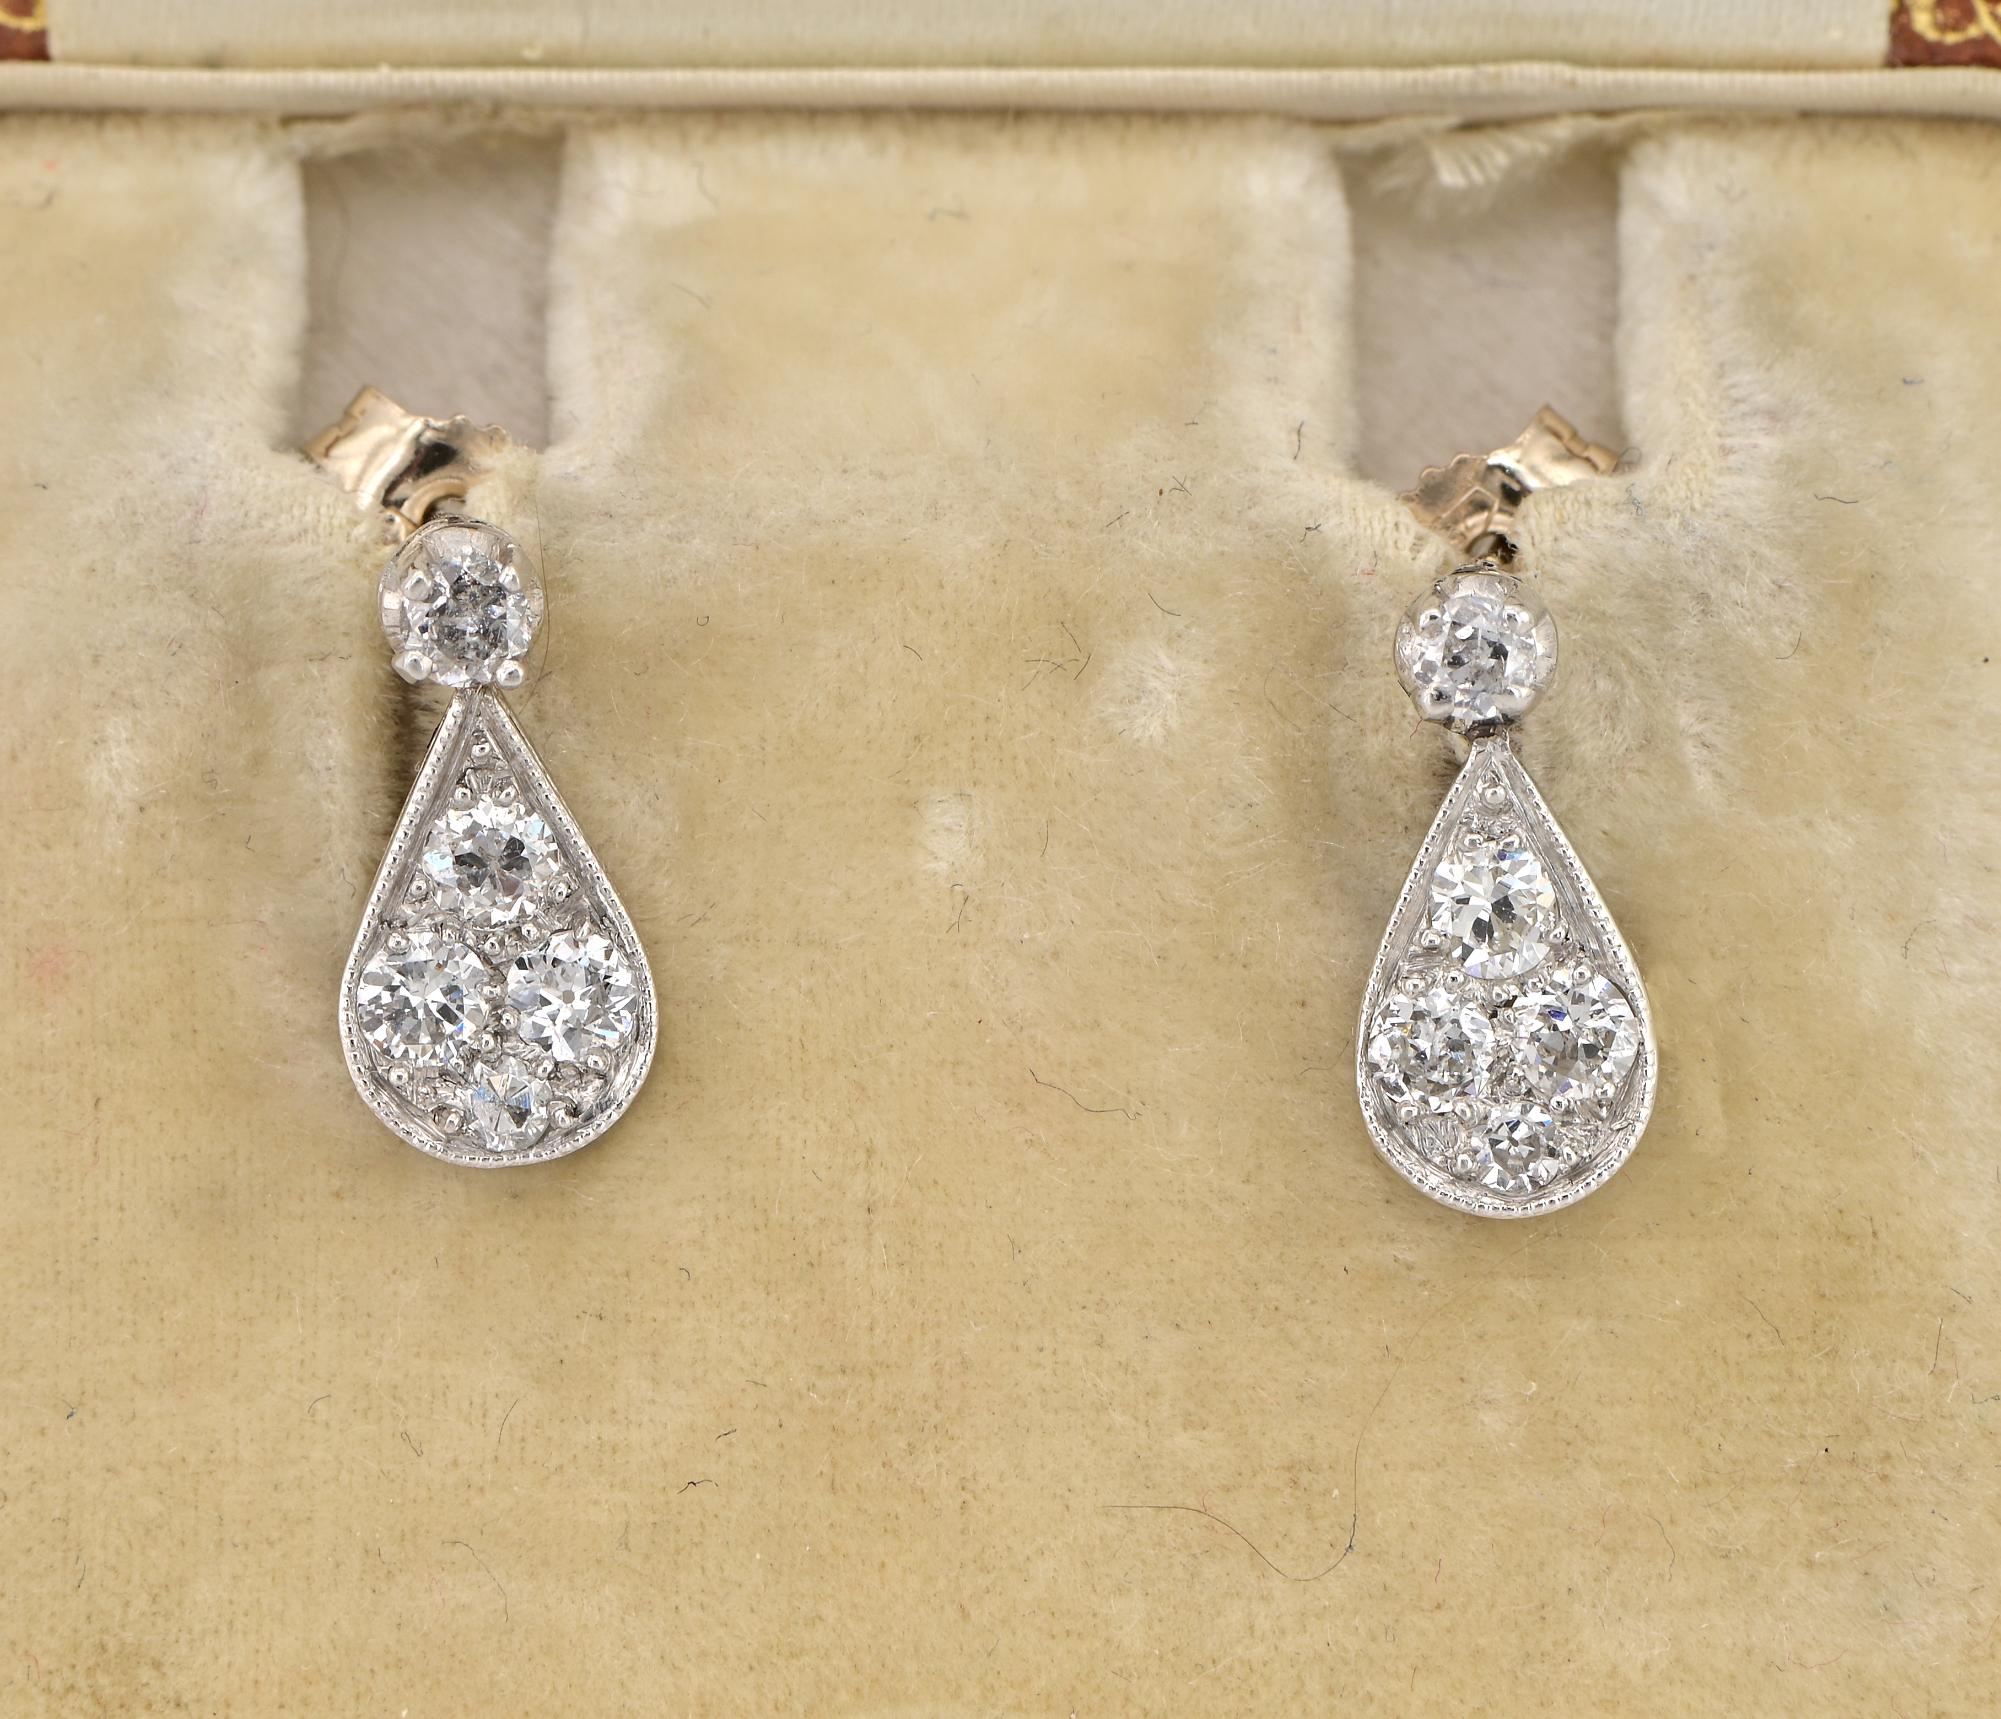 Simply Gorgeous
These sweet Art Deco period Diamond petit drop earrings are 1930 ca
Hand crafted as unique of solid Platinum, butterfly fasteners in gold, both marked
Charming drop shape topped by a tiny top Diamond completing the design
They are